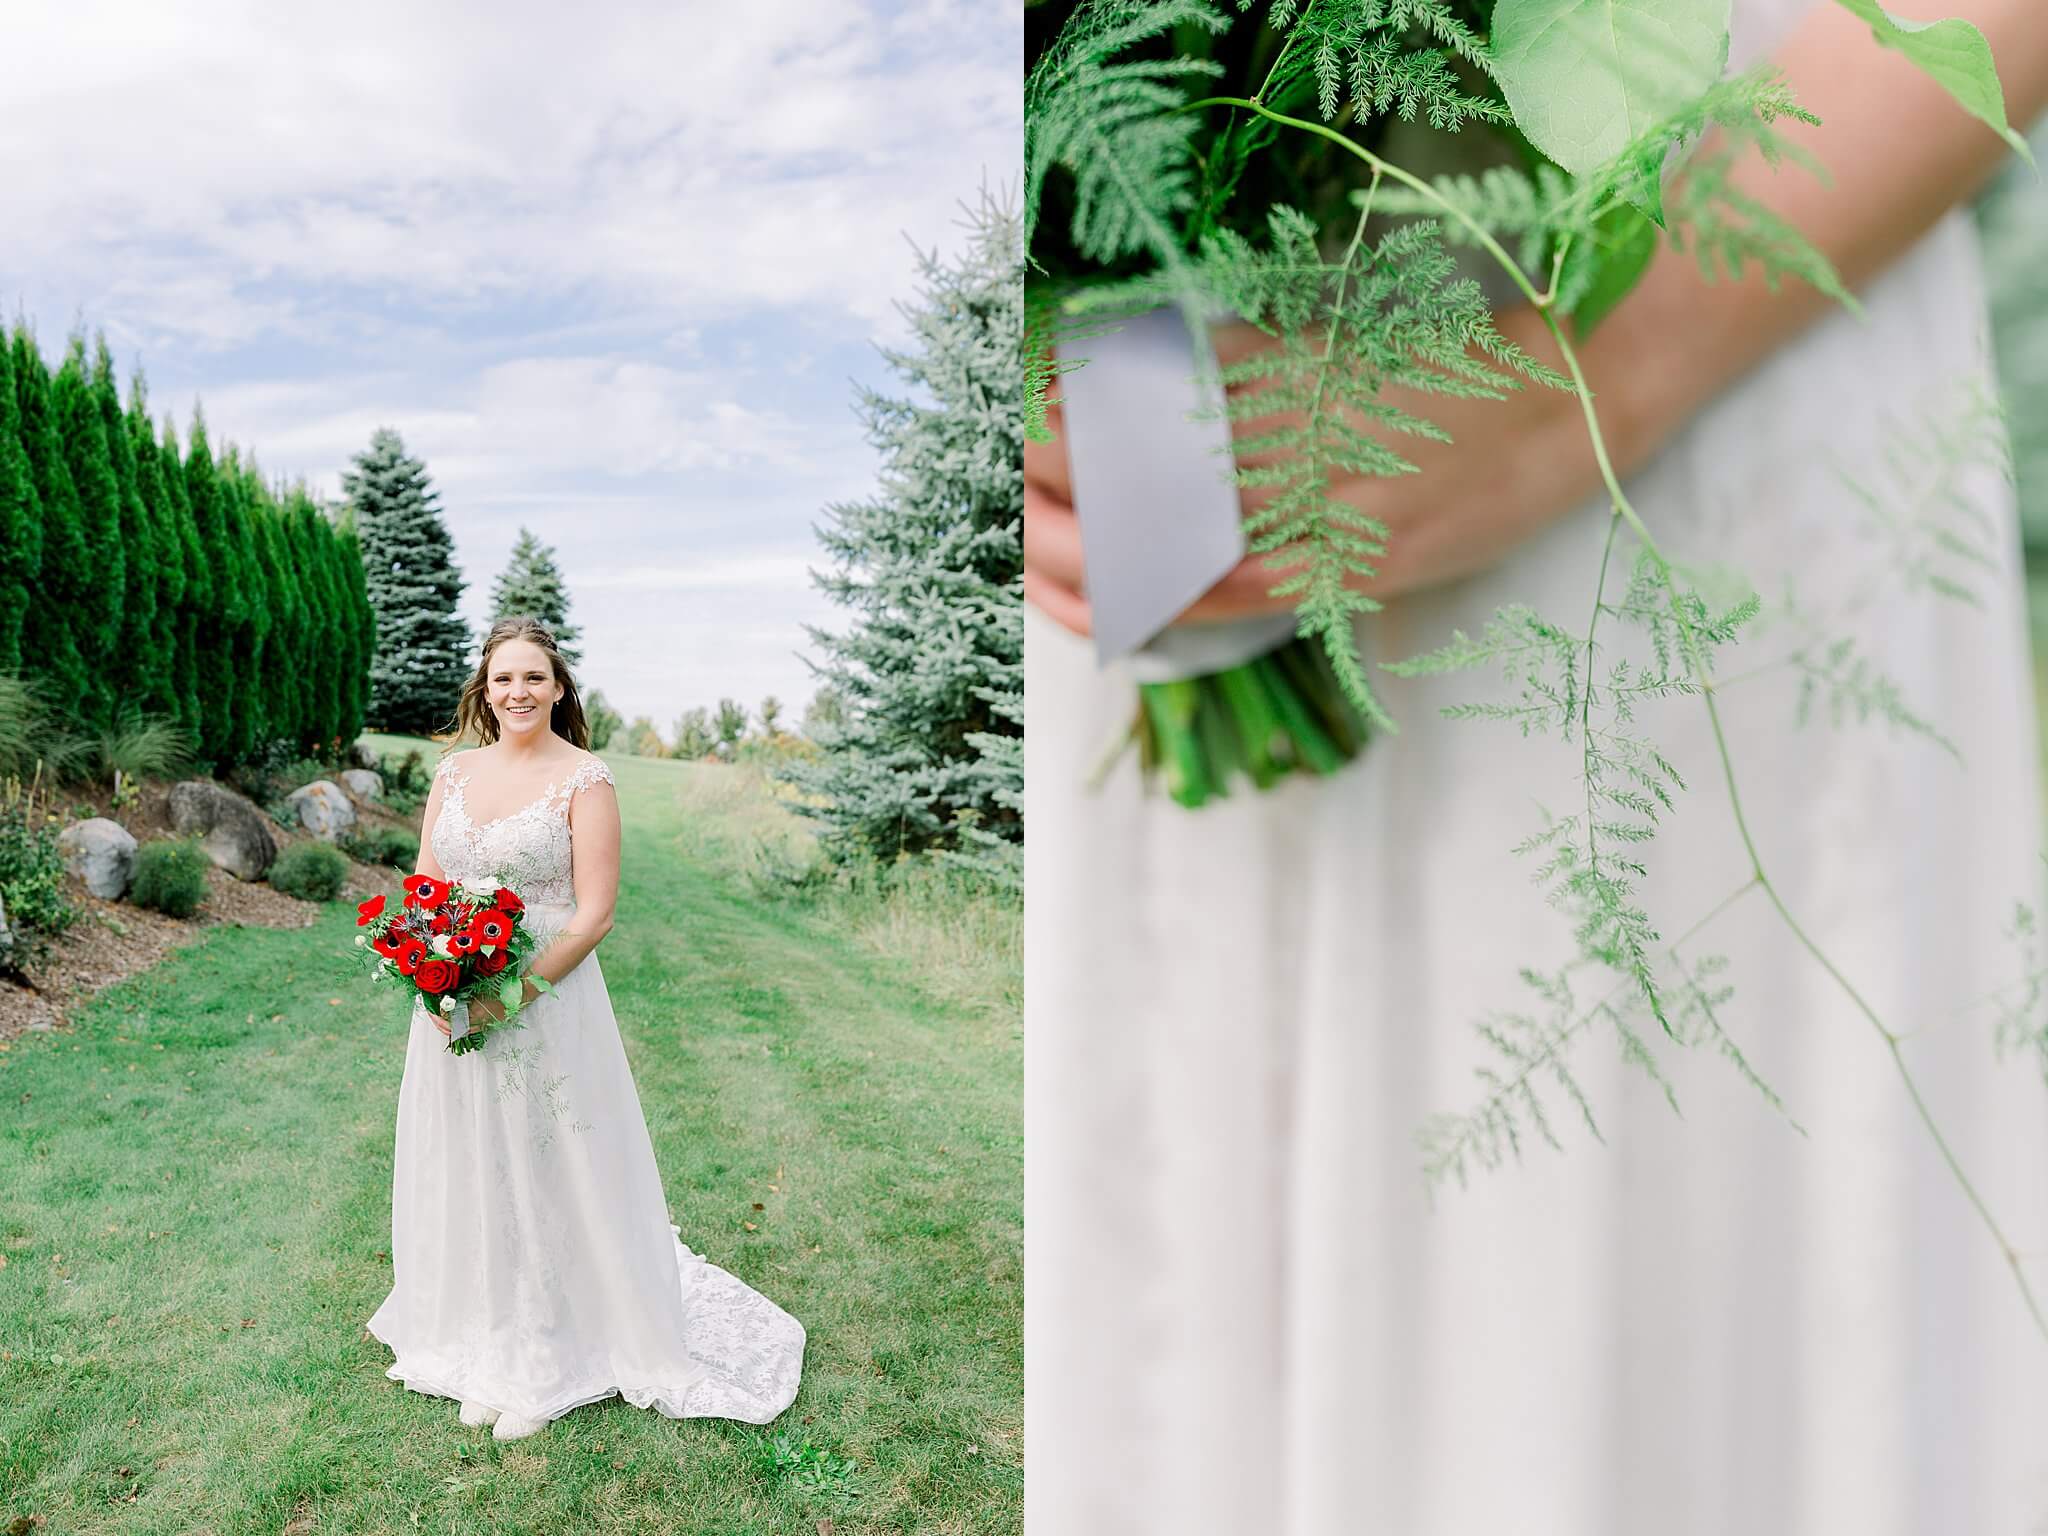 Bride smiling holding bouquet during Timberlee Hills Wedding in Traverse City, Northern Michigan.